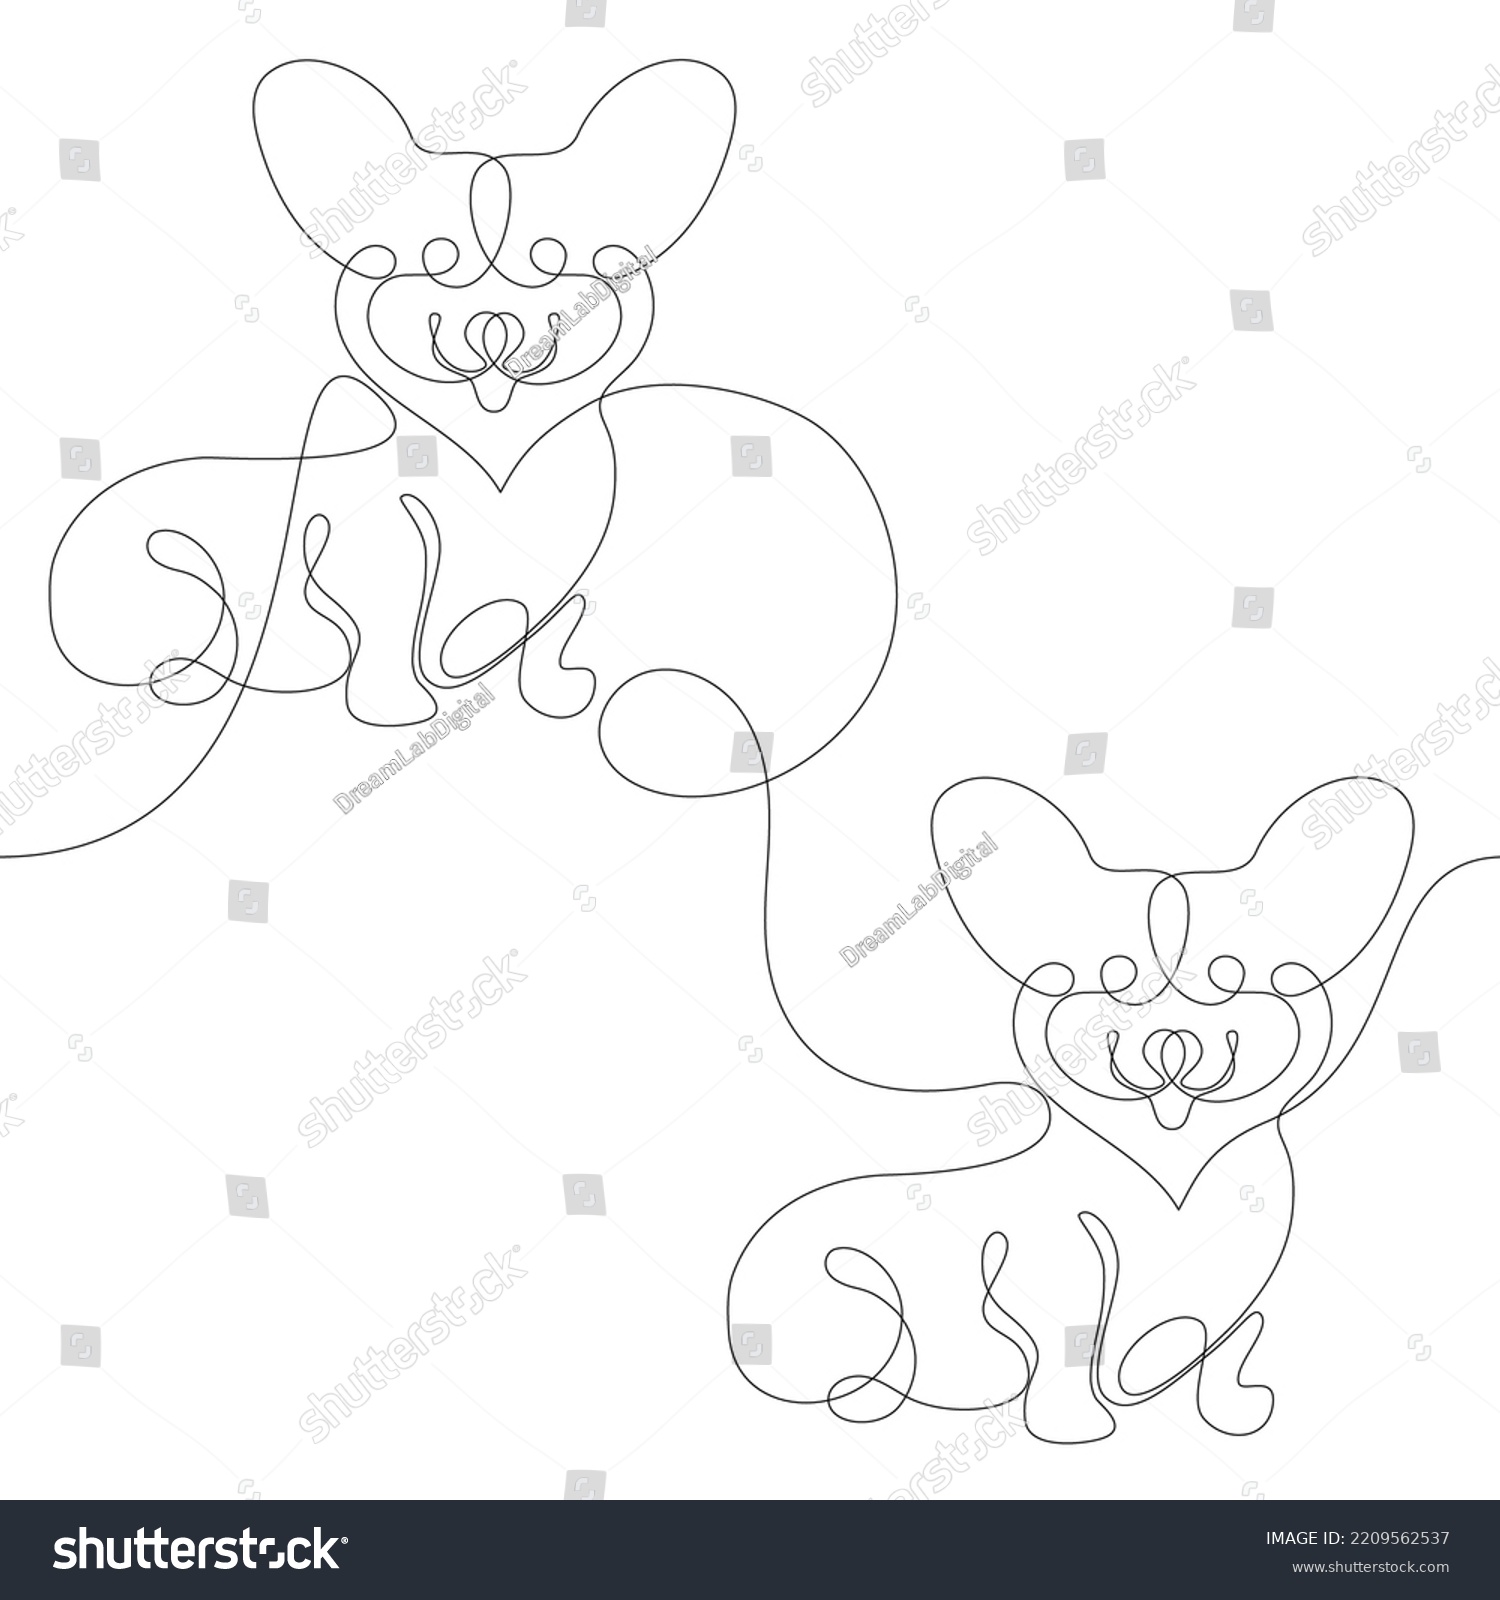 SVG of Cute corgi dogs seamless one line continuous drawing for sewing, stitching, quilting. Children textile craft pattern. svg